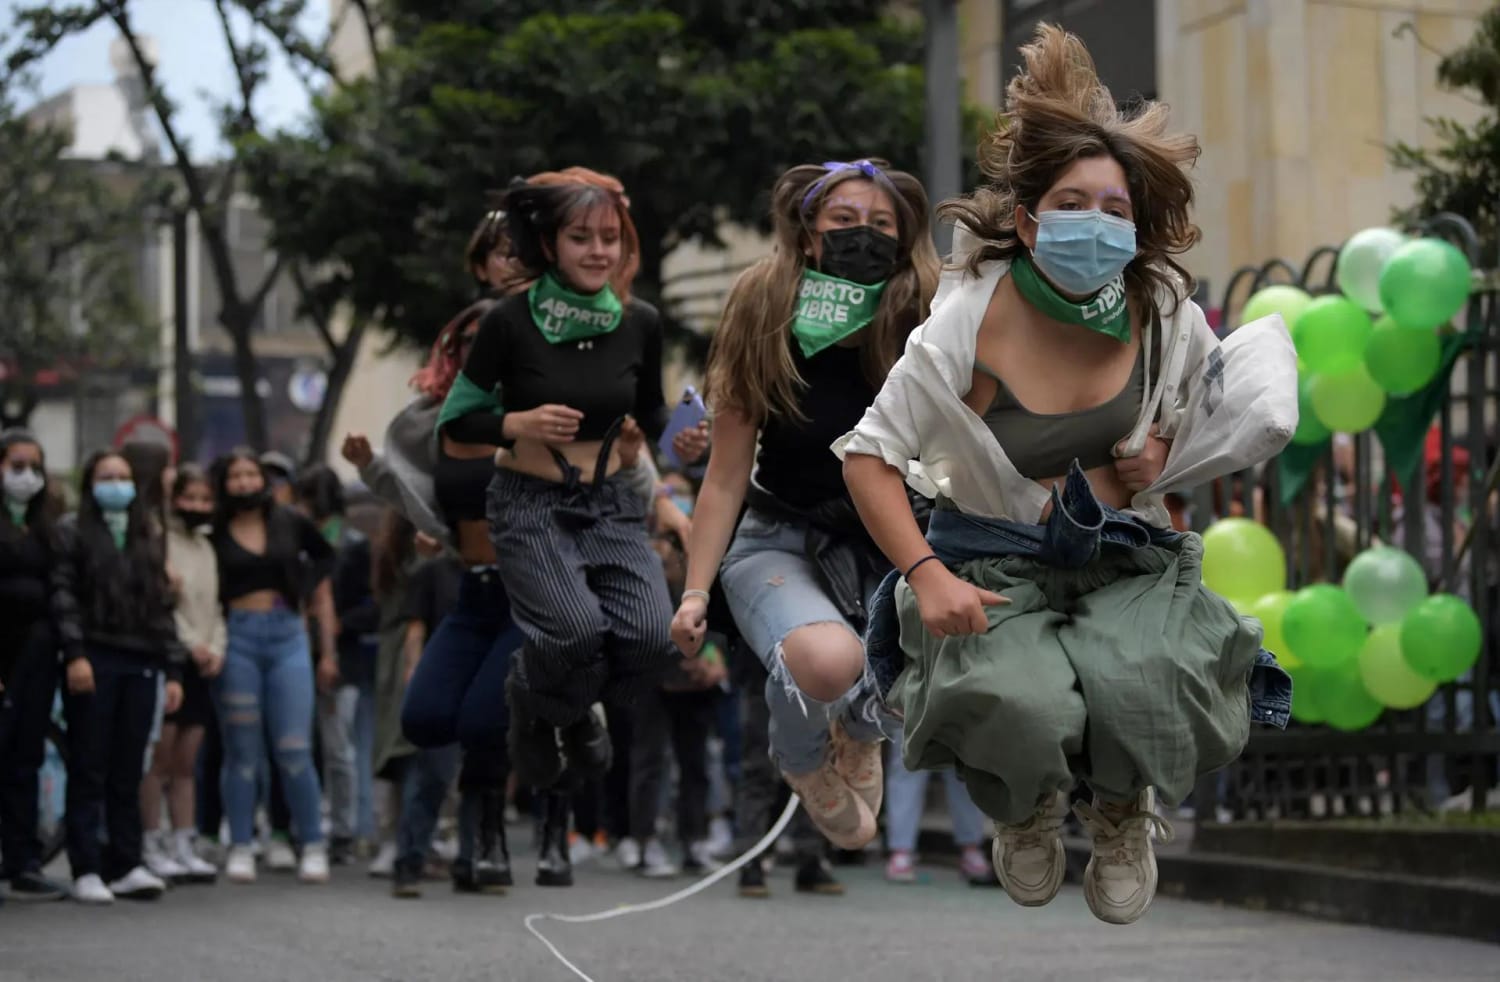 Women in Bogota, Colombia jump for joy to celebrate the decriminalisation of abortion